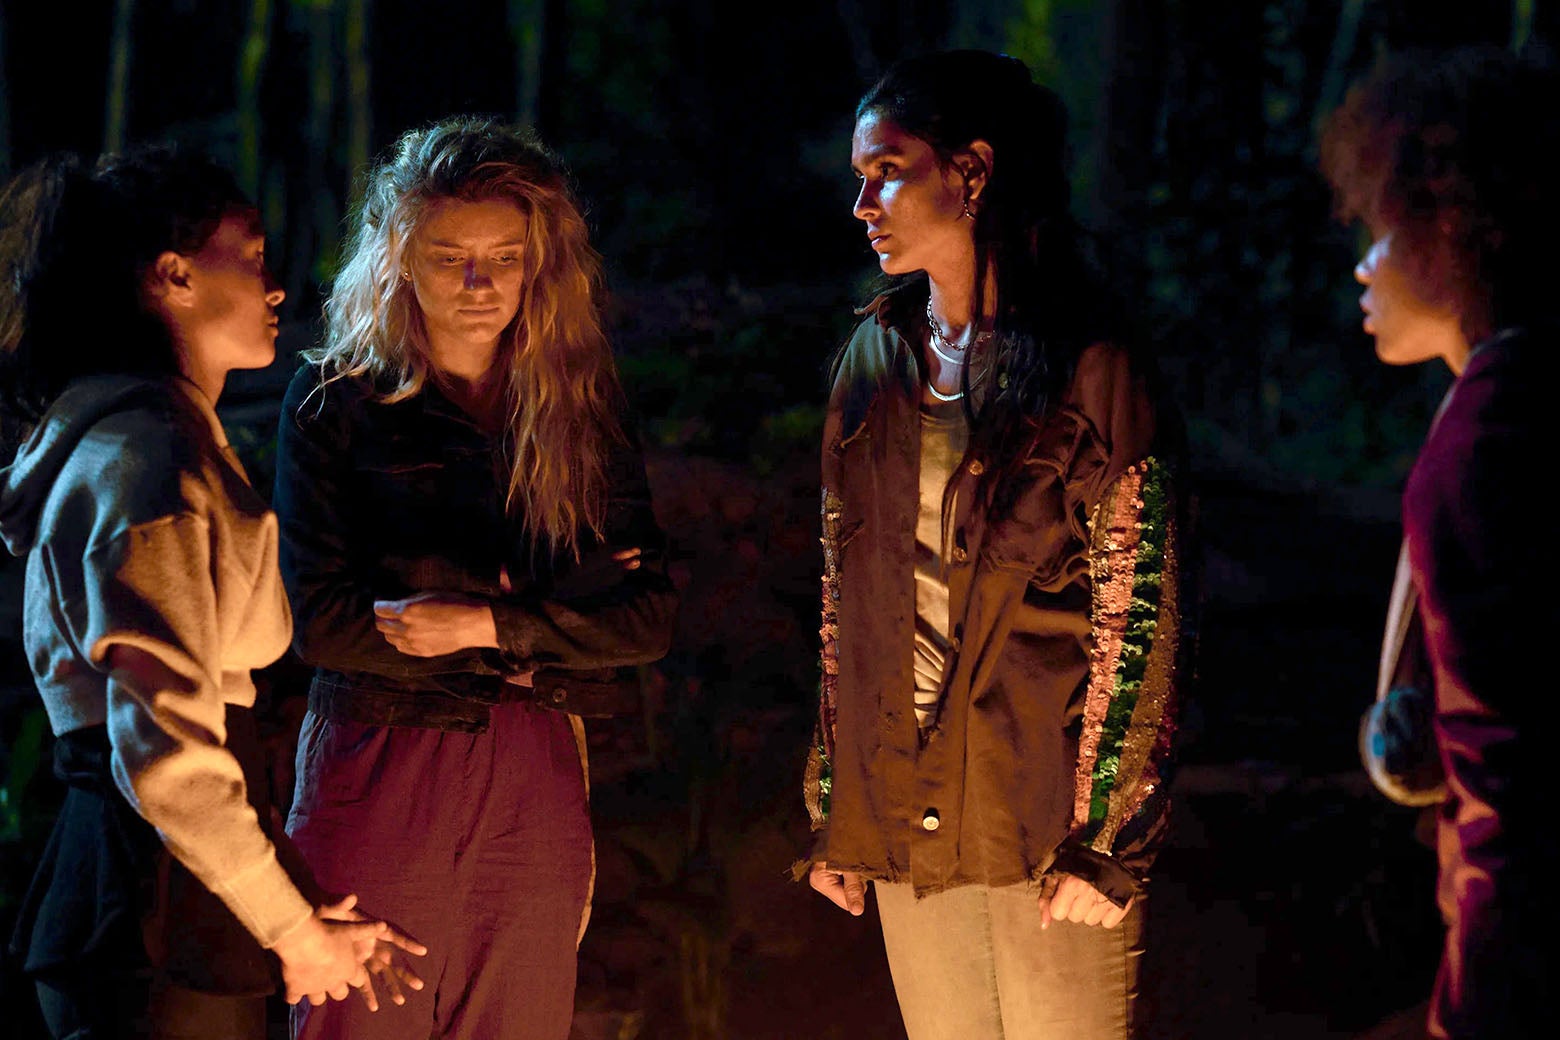 Four young women stand in the glow of a campfire at night.